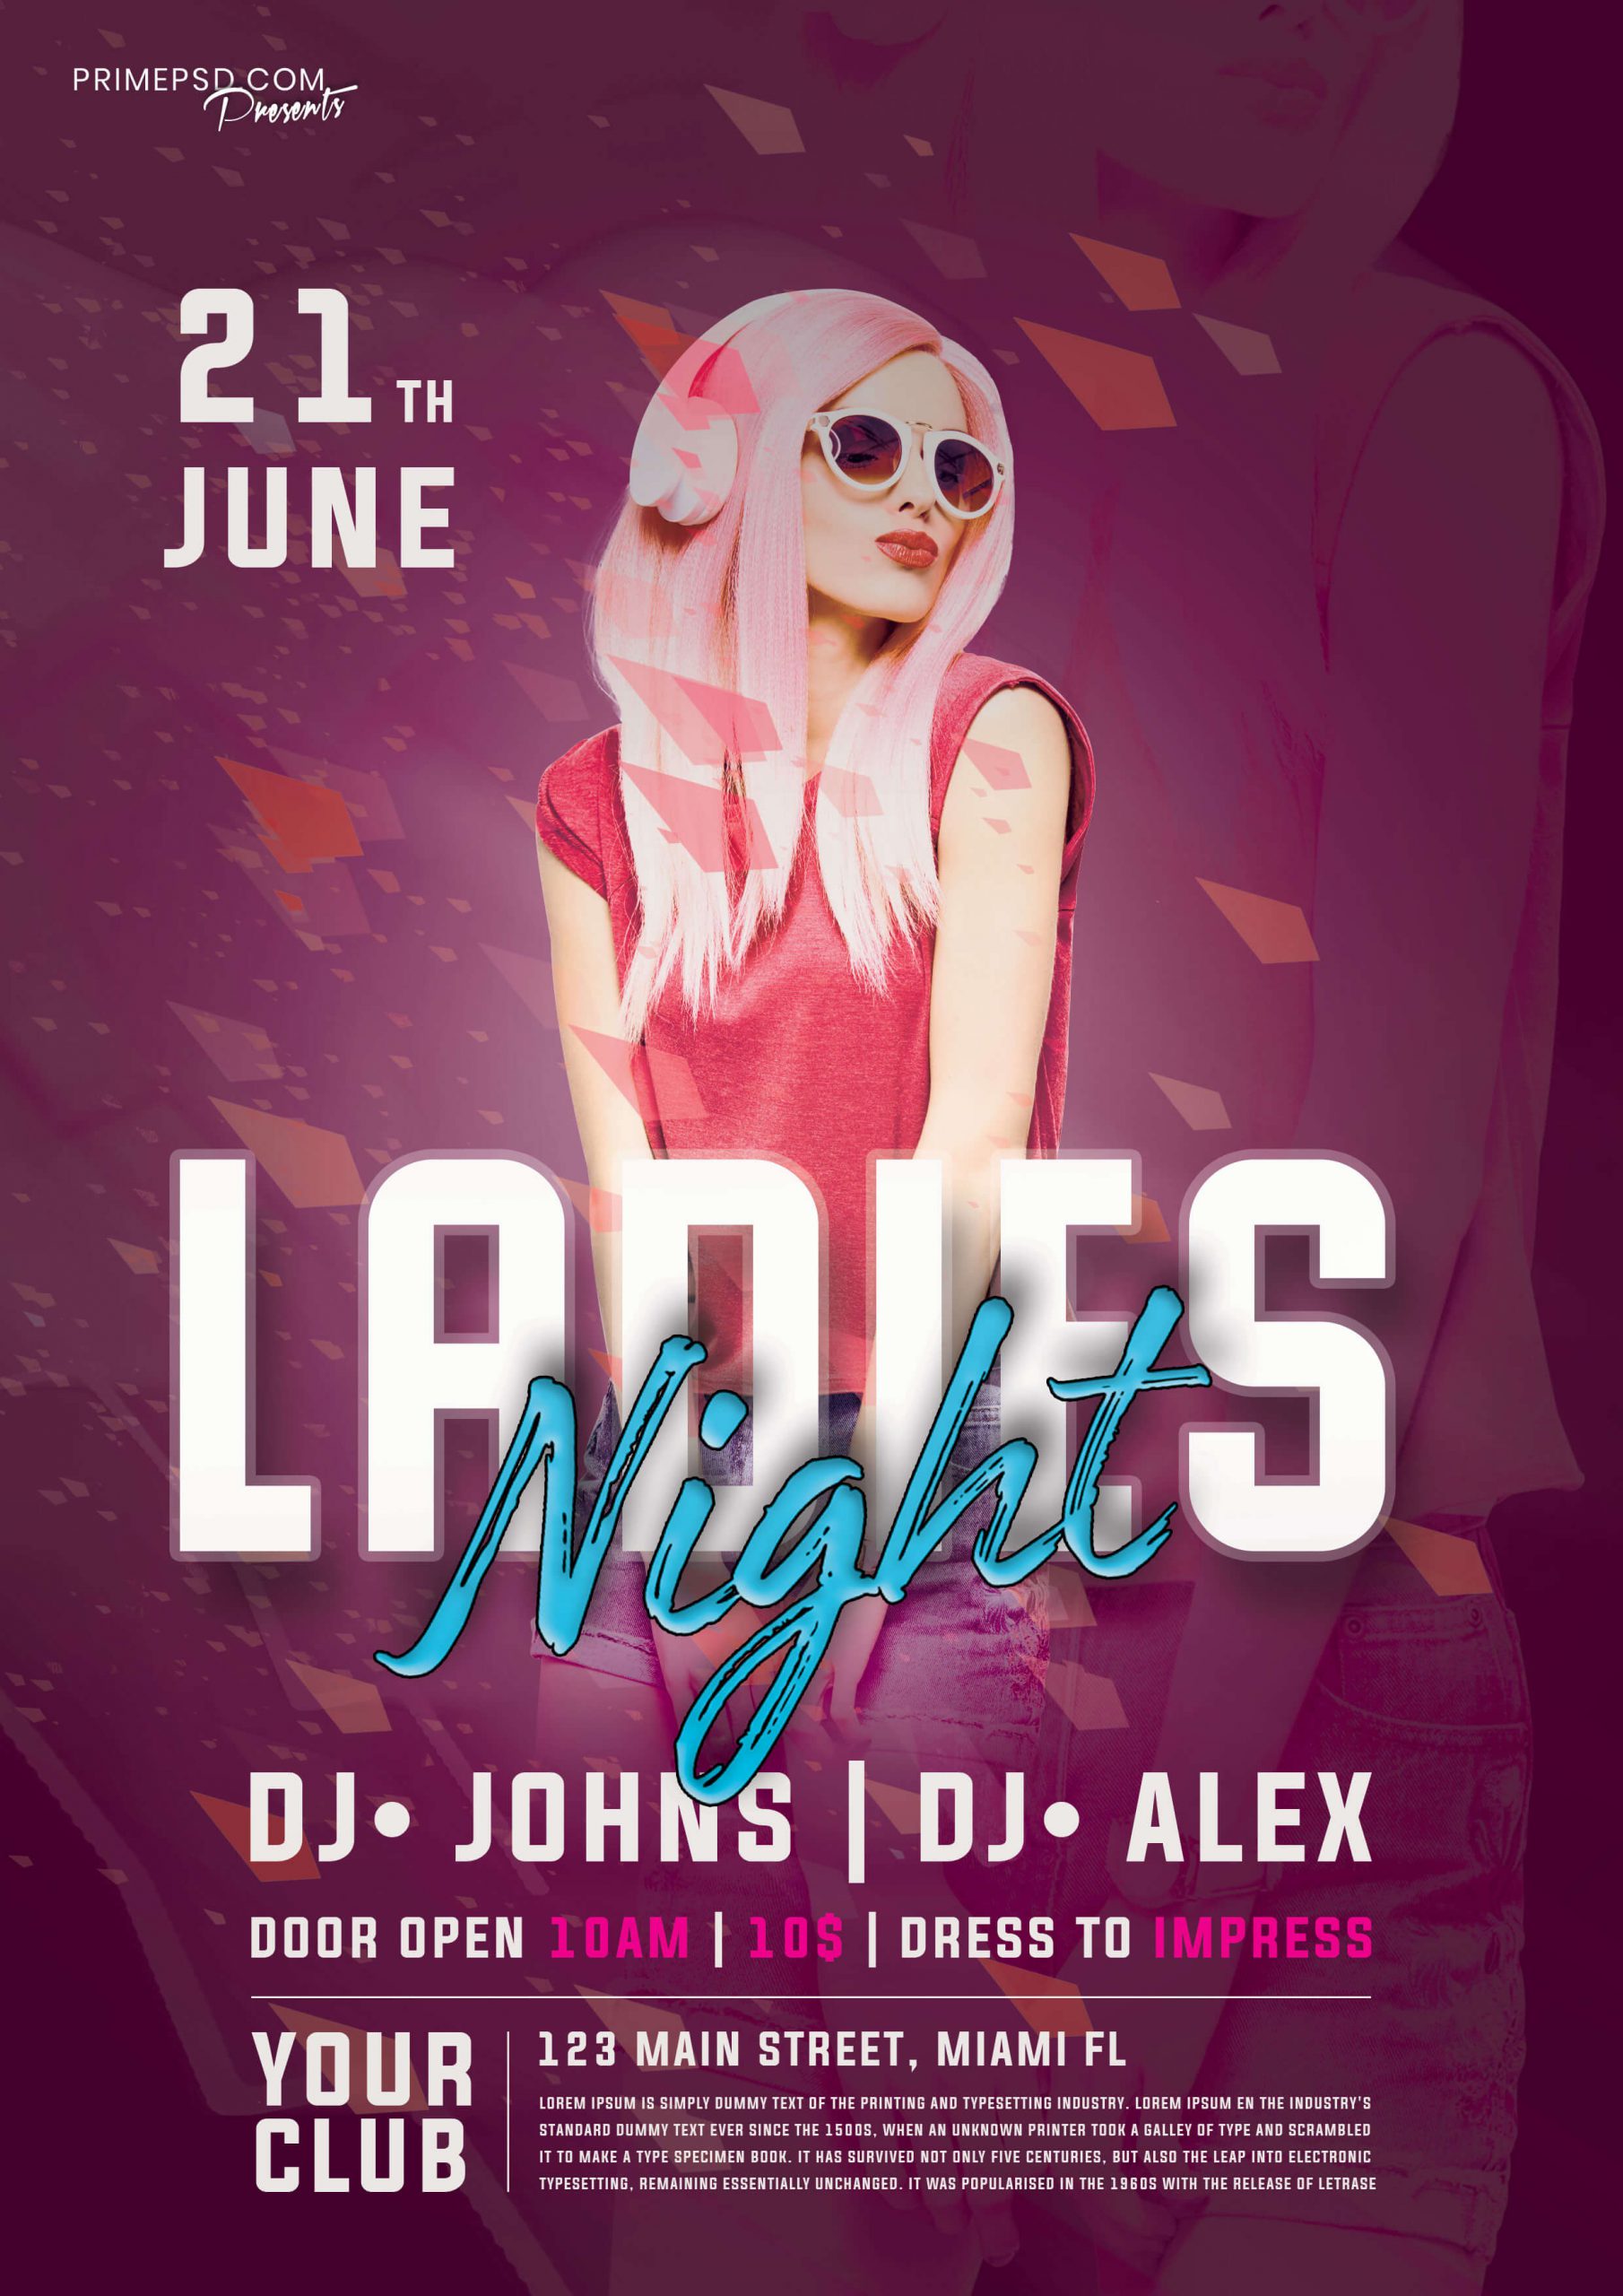 ladies night, ladies night flyer, laddies night flyer, flyer psd, psd flyer, ladies night free psd flyer, primepsd, prime psd, psdfreebeis, flyer, psd, party flyer, party